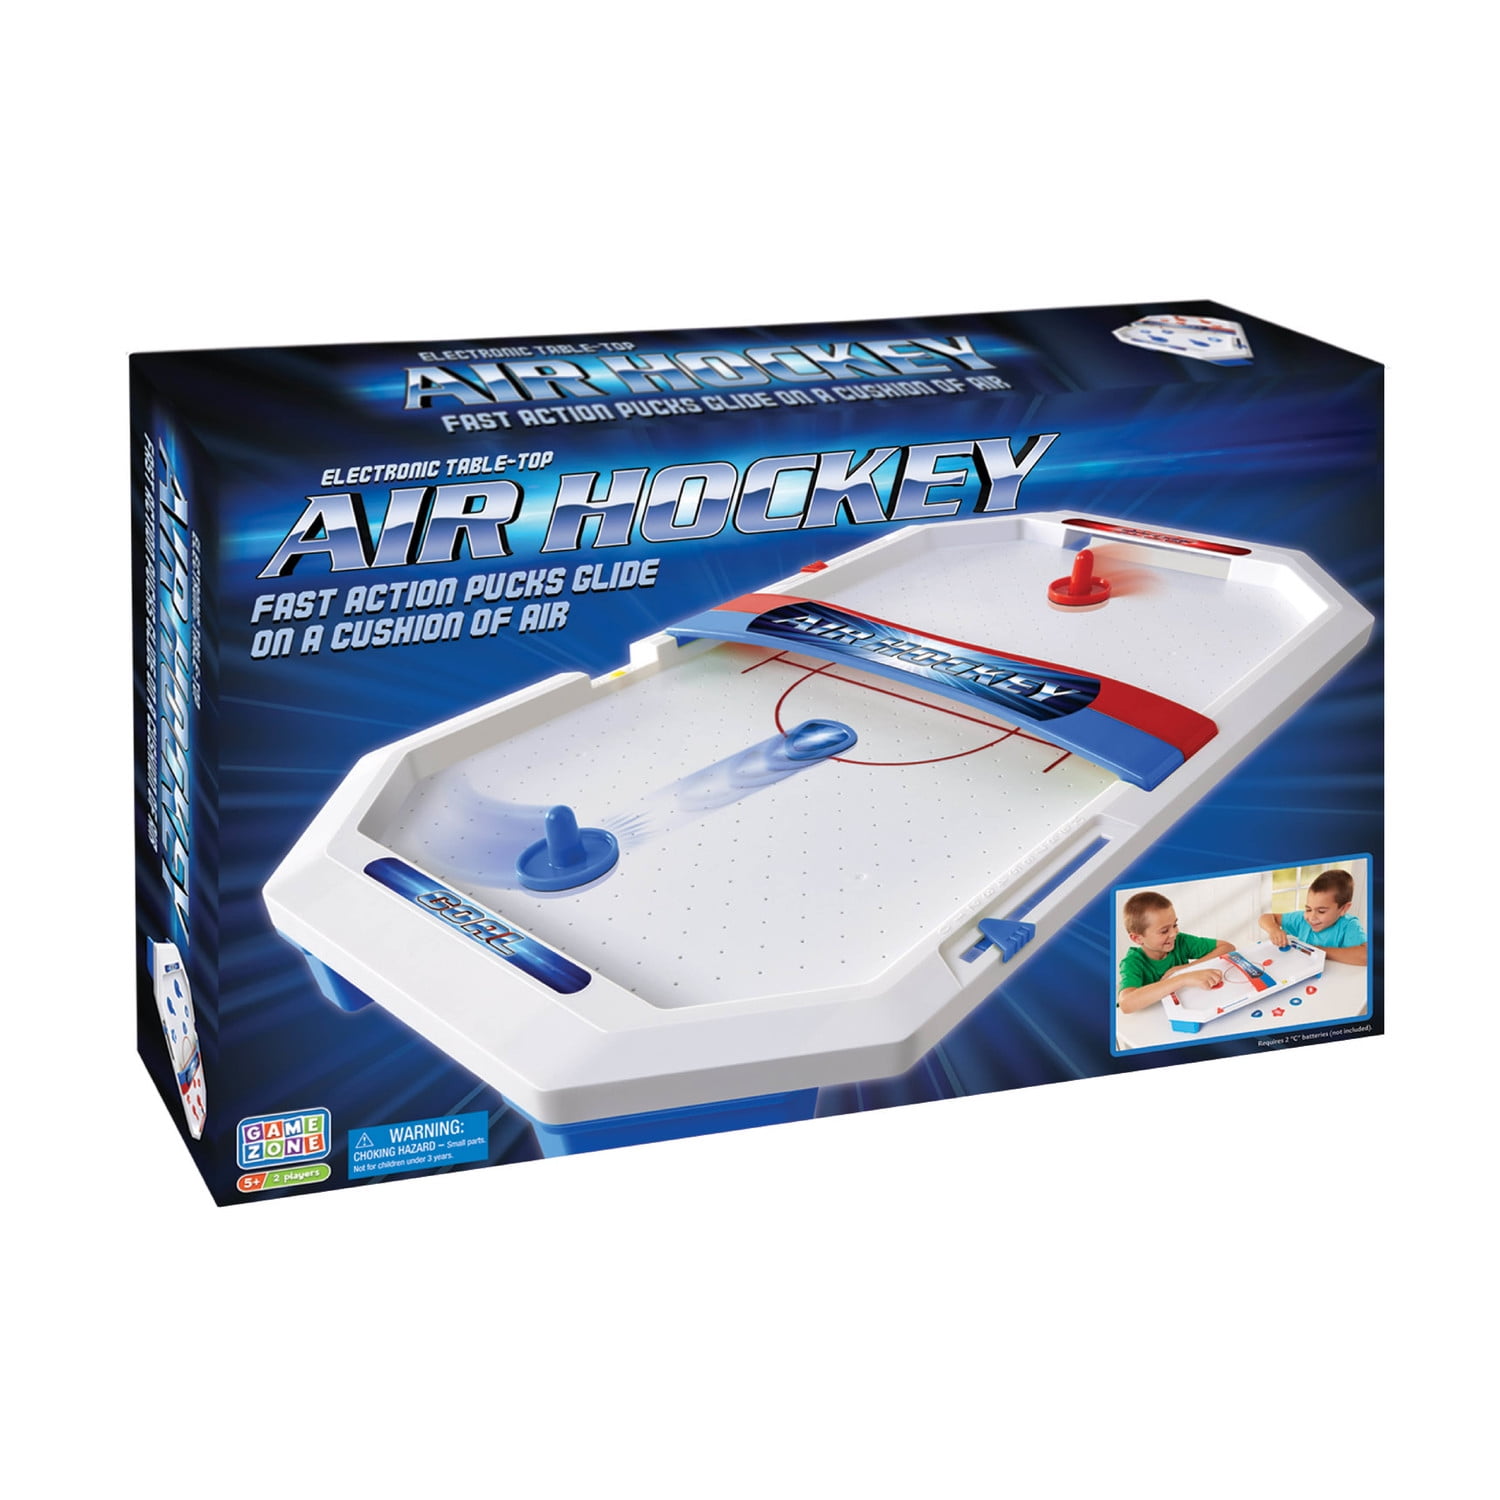 Details about   EMERSON TABLETOP AIR POWERED HOCKEY GAME 5 PIECE SET NEW IN BOX 